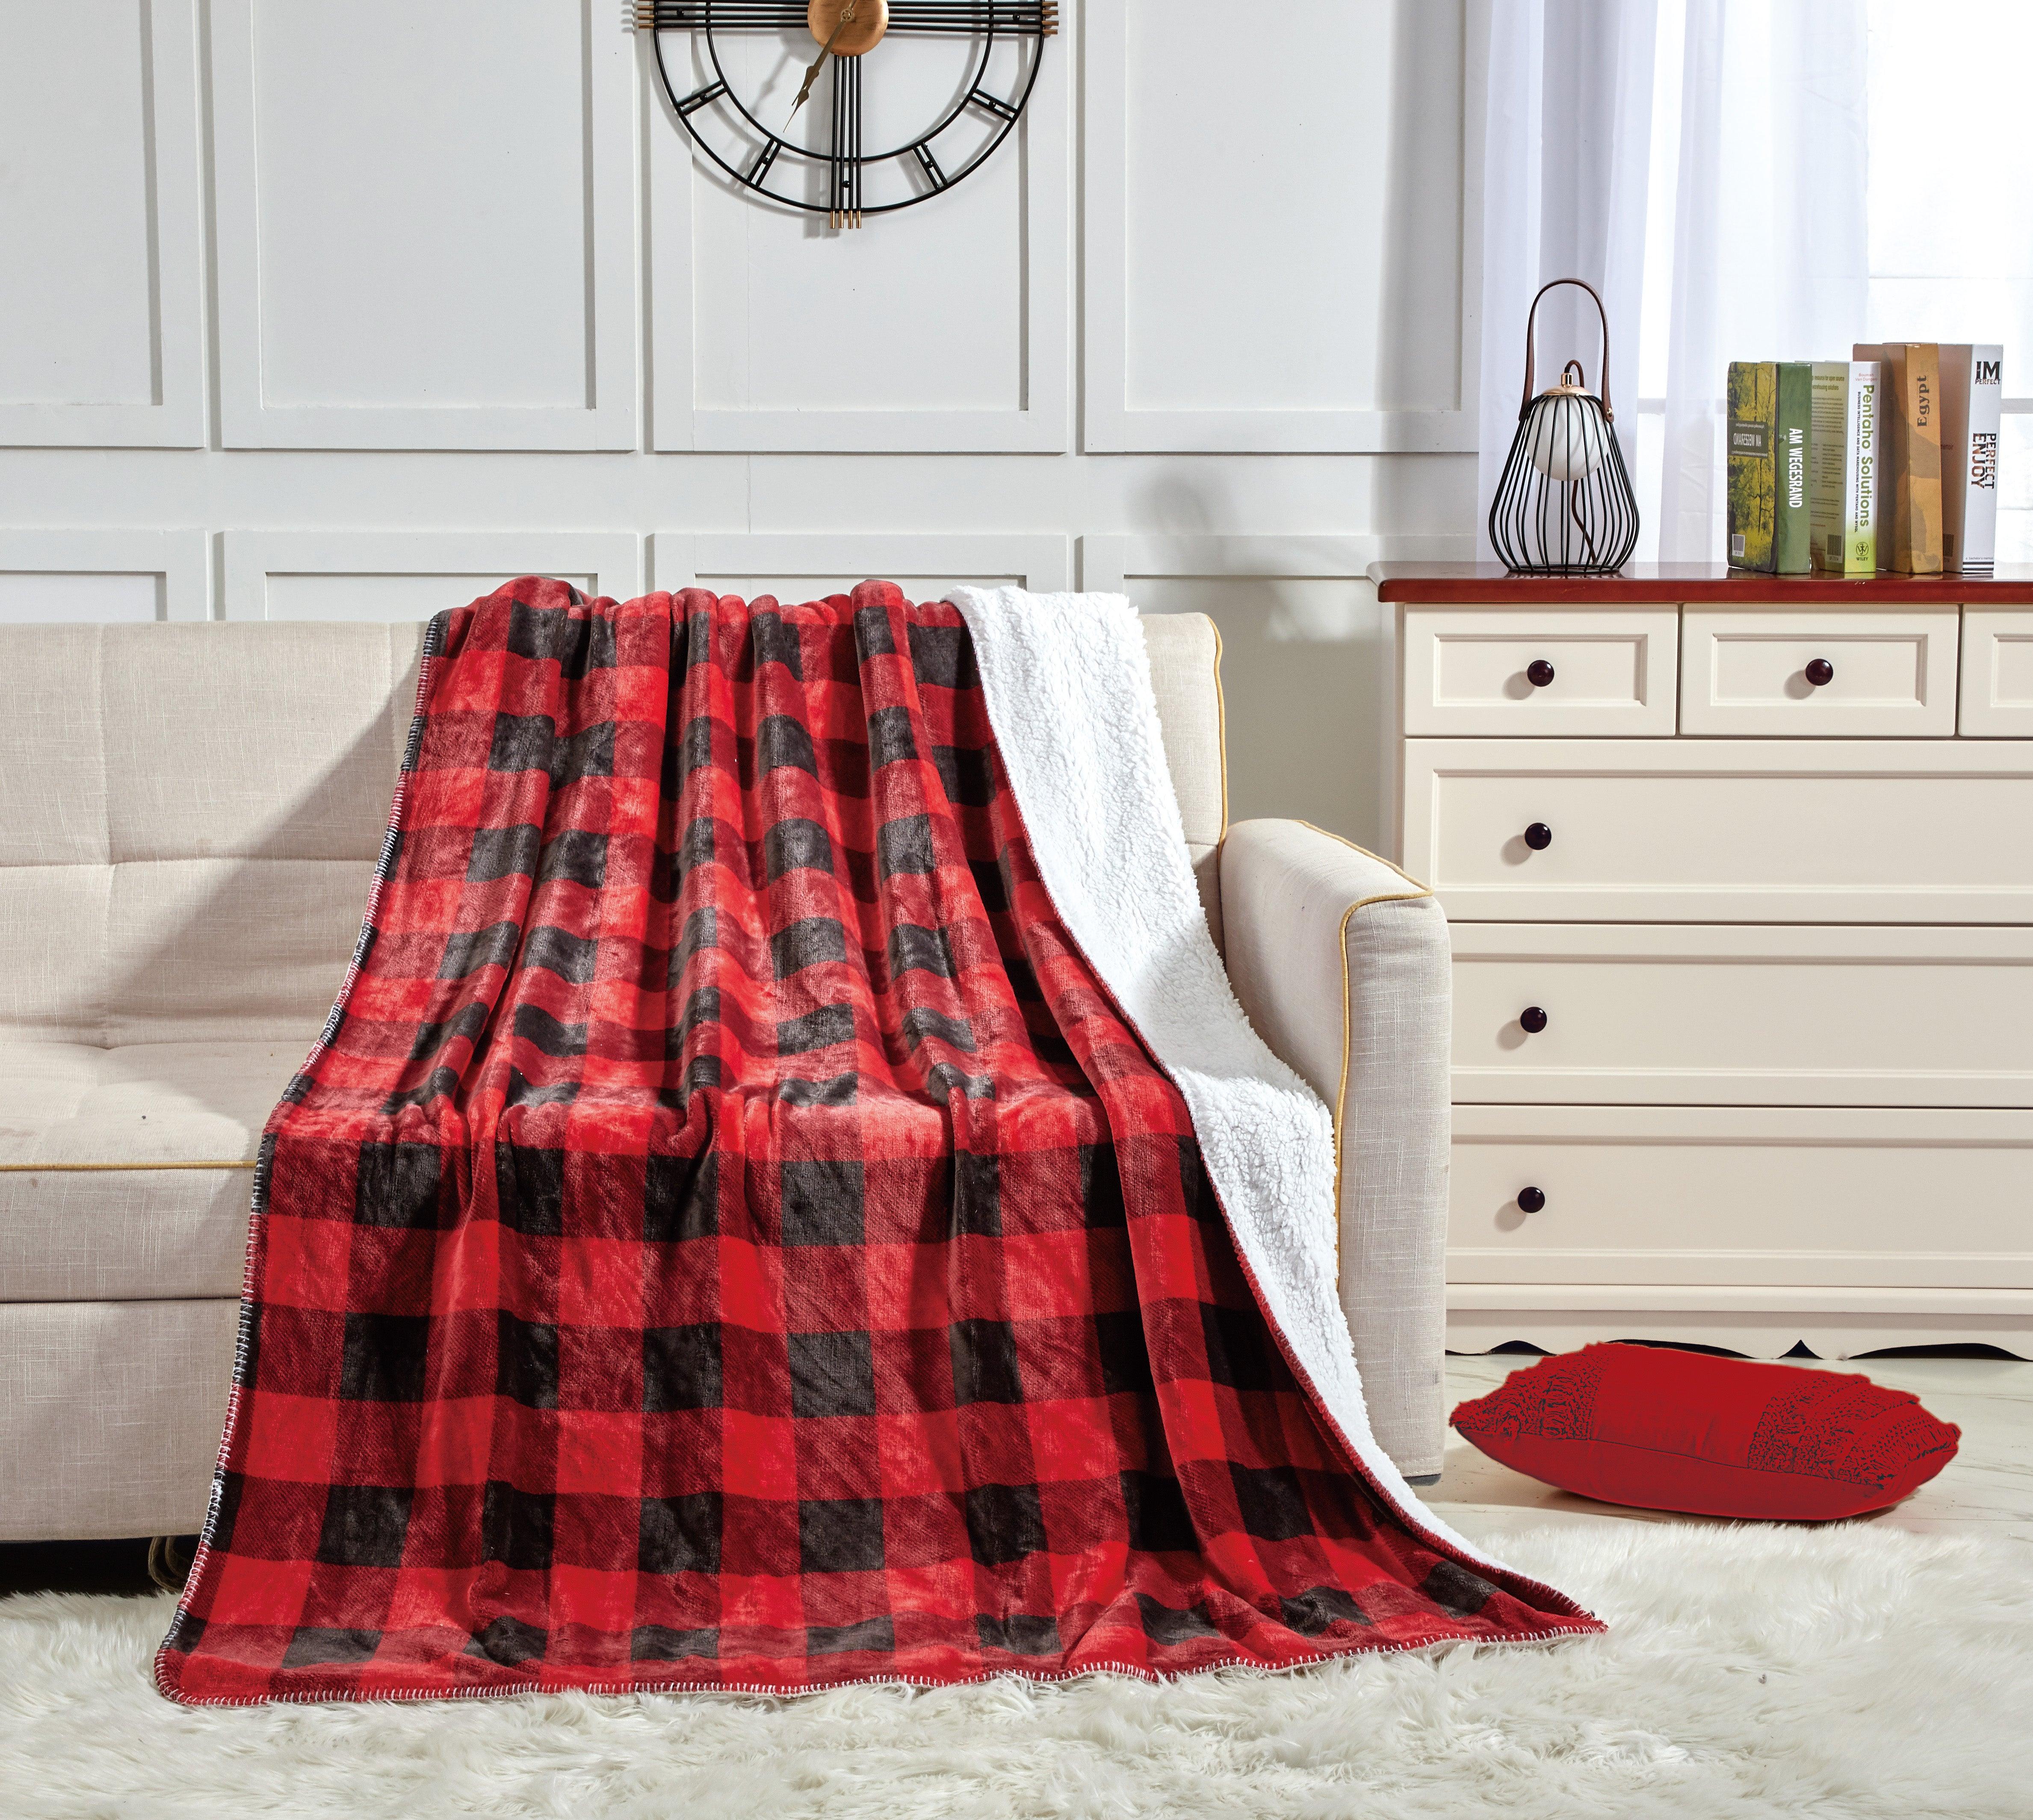 Ultra Soft Oversized Plush Altitude Throw Blanket - Stylish Home Décor for Bed or Couch